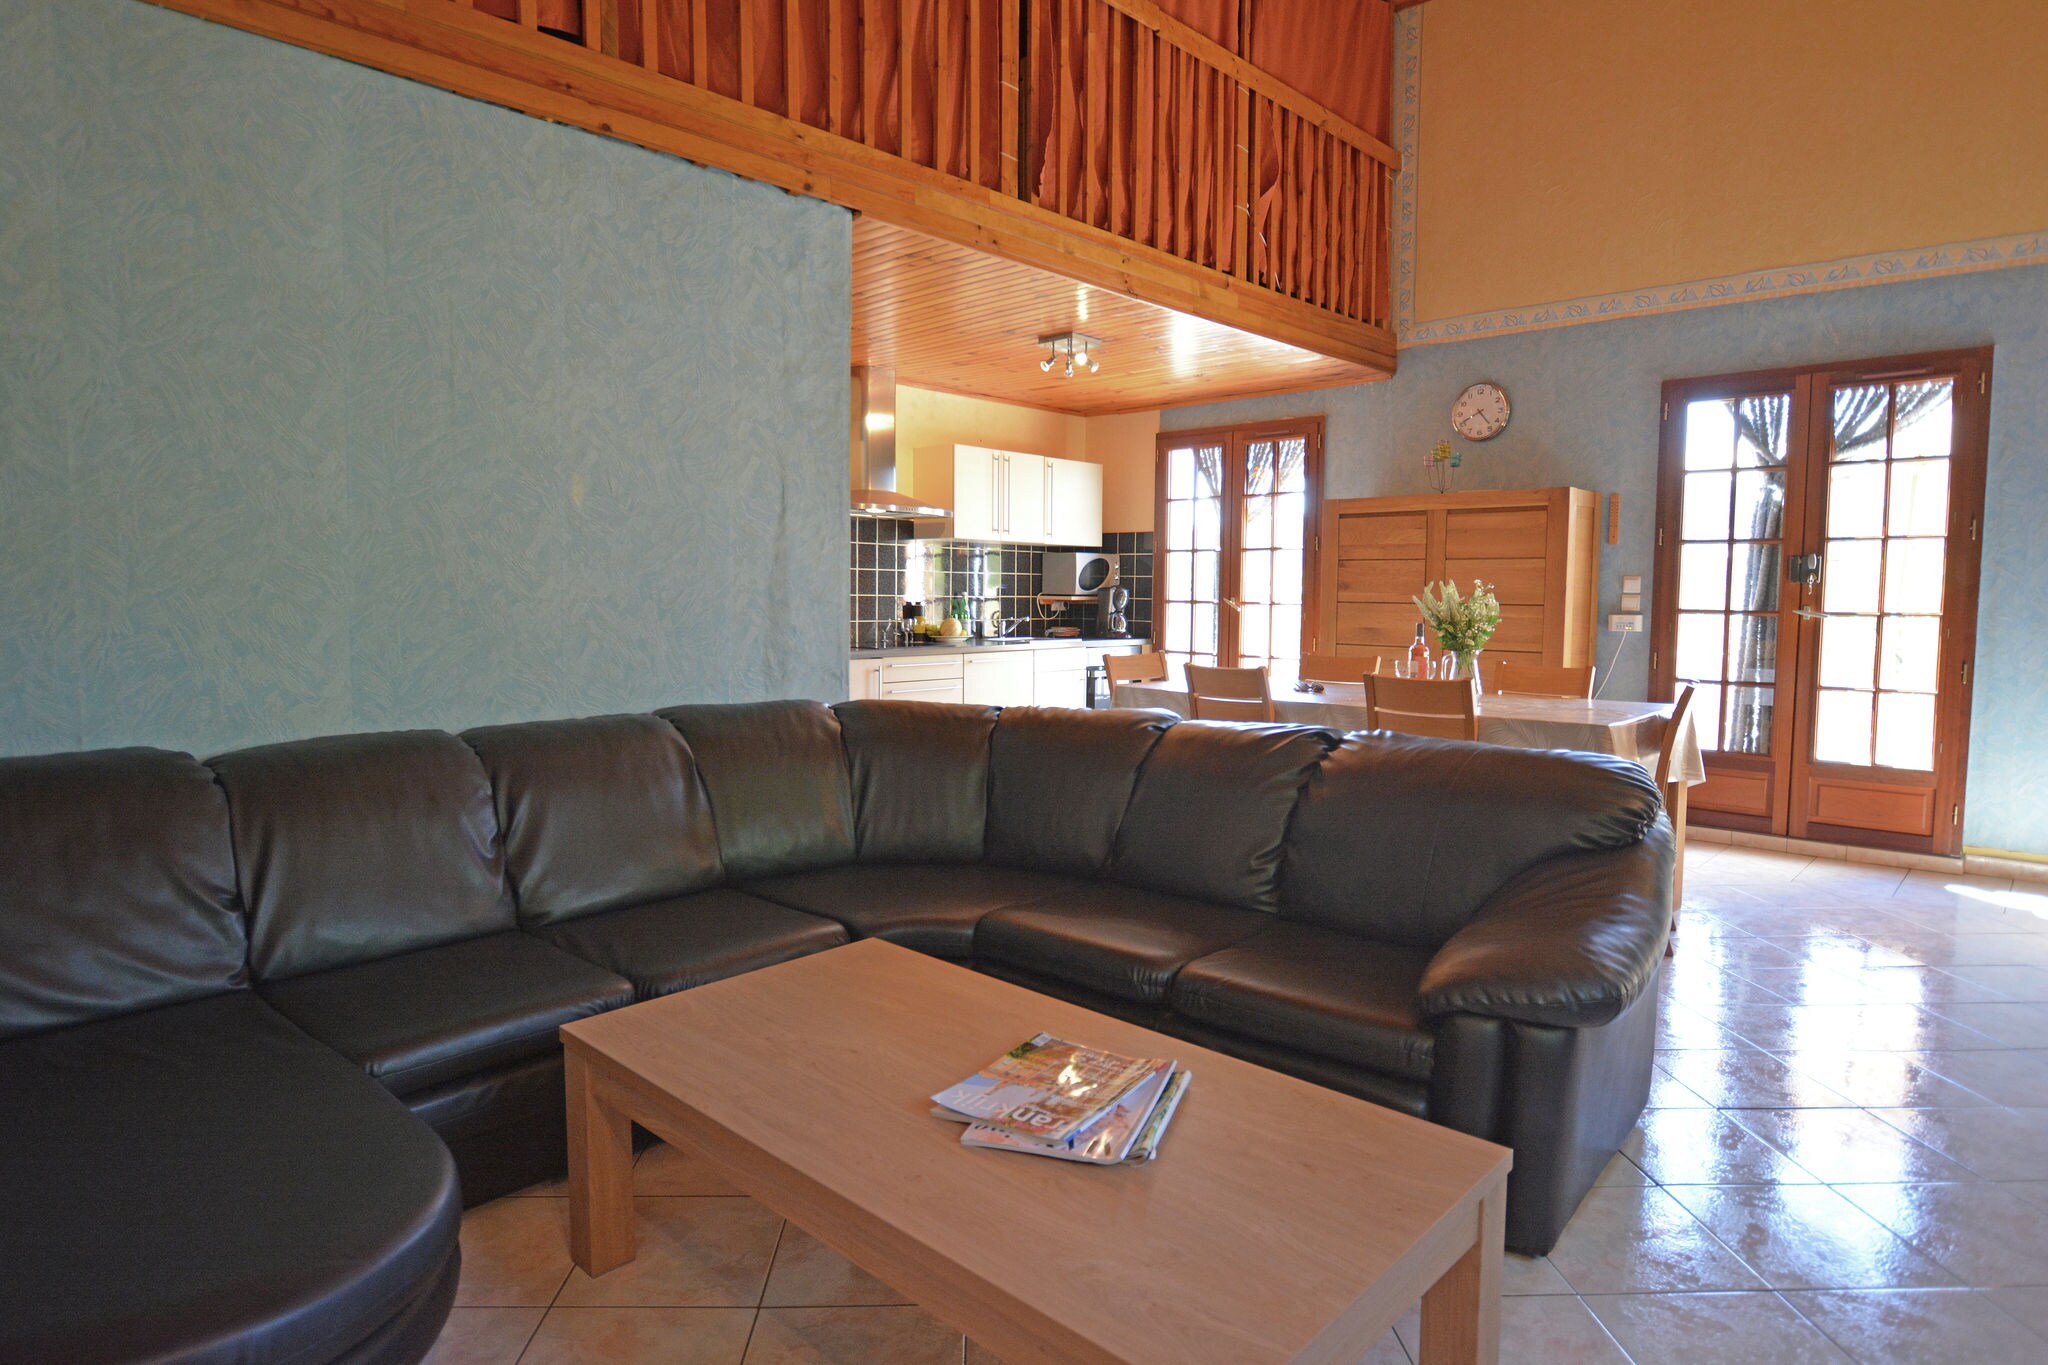 Secluded Villa in Félines with Private Pool, Nice Views & Close to Town Centre